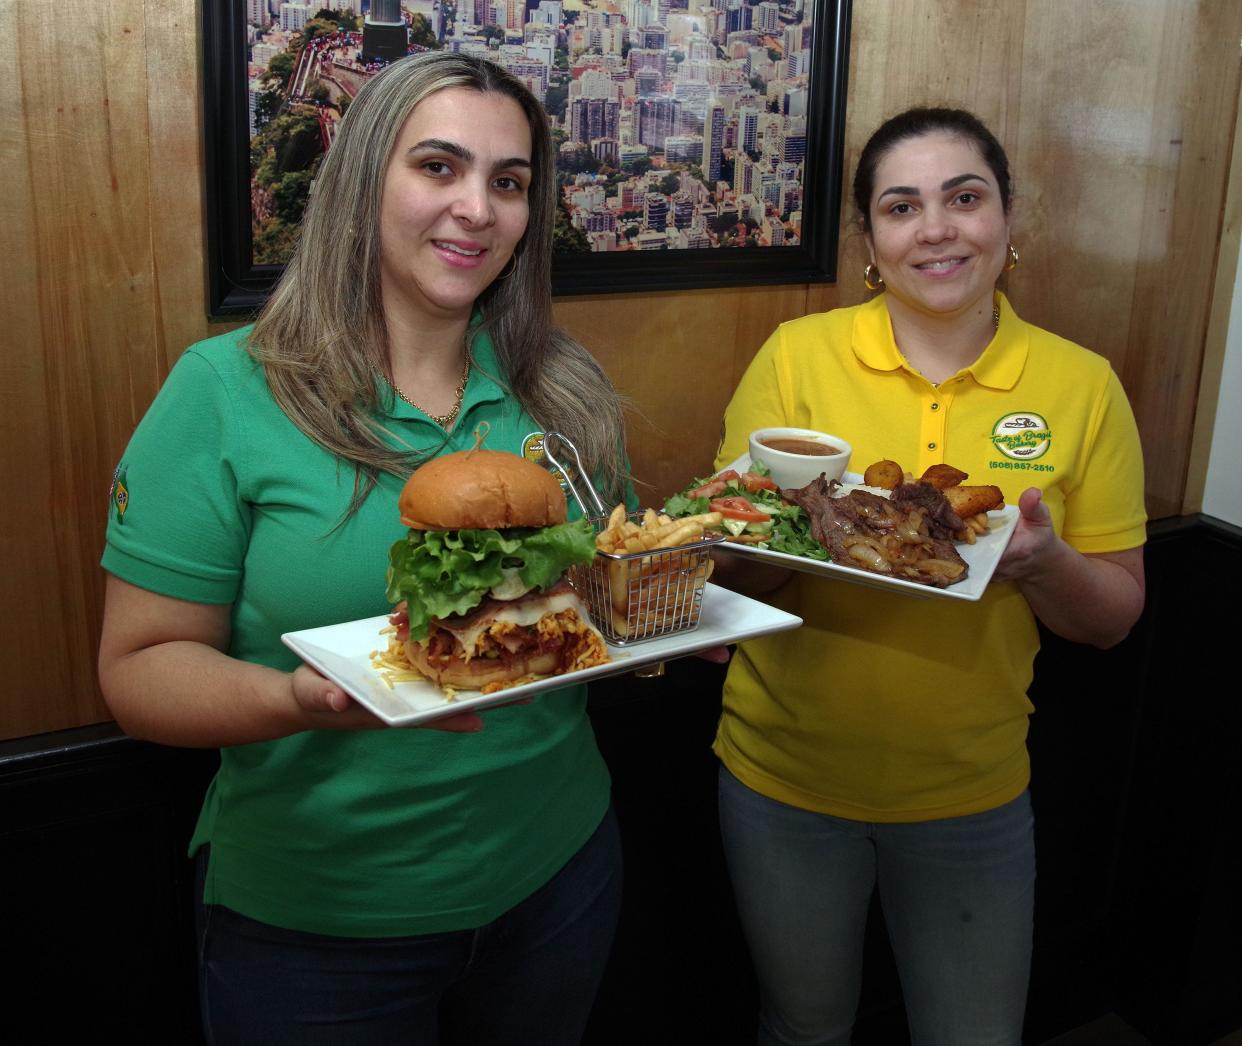 Taste of Brazil co-owners and sisters Jacqualine Macedo of Hanson and Aline Macedo of Whitman hold up their X Brazil sandwich and Plate of The Day dishes, two of the more popular entrees they serves at their very popular restaurant on Crescent Street in Brockton on Thursday, March 16, 2023.